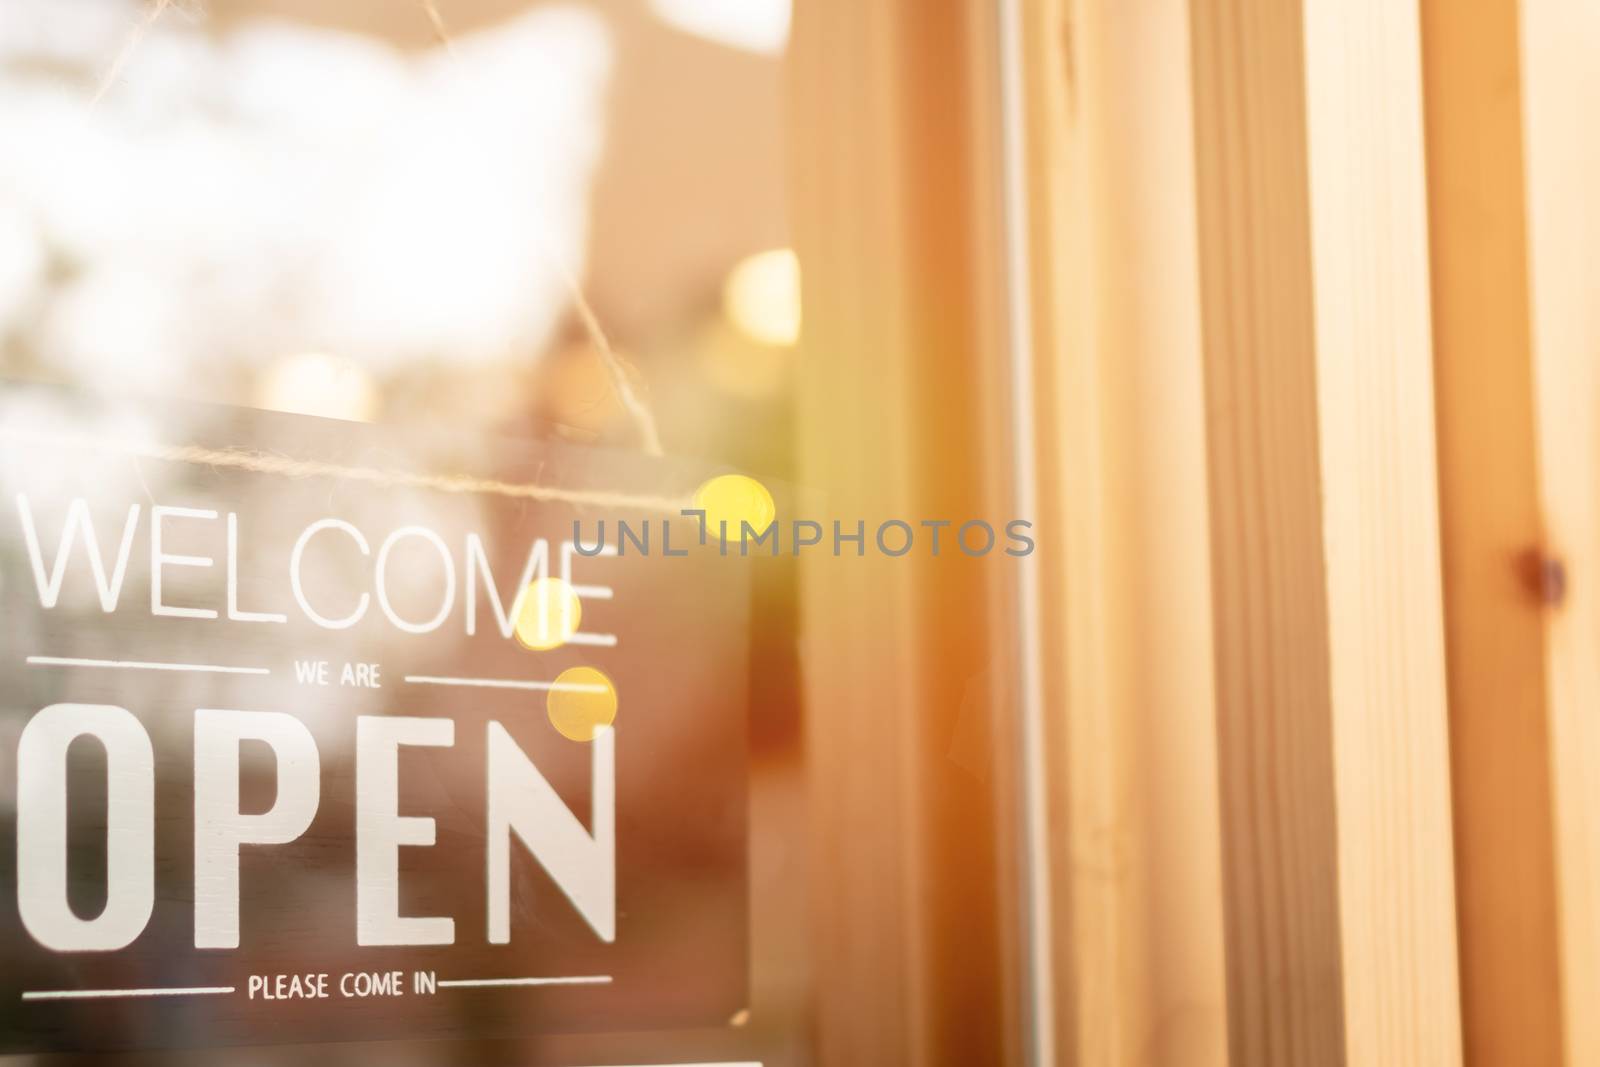 Open sign vintage style at coffee cafe shop with sunrise and bokeh. Metaphor of start or begin a own business. 